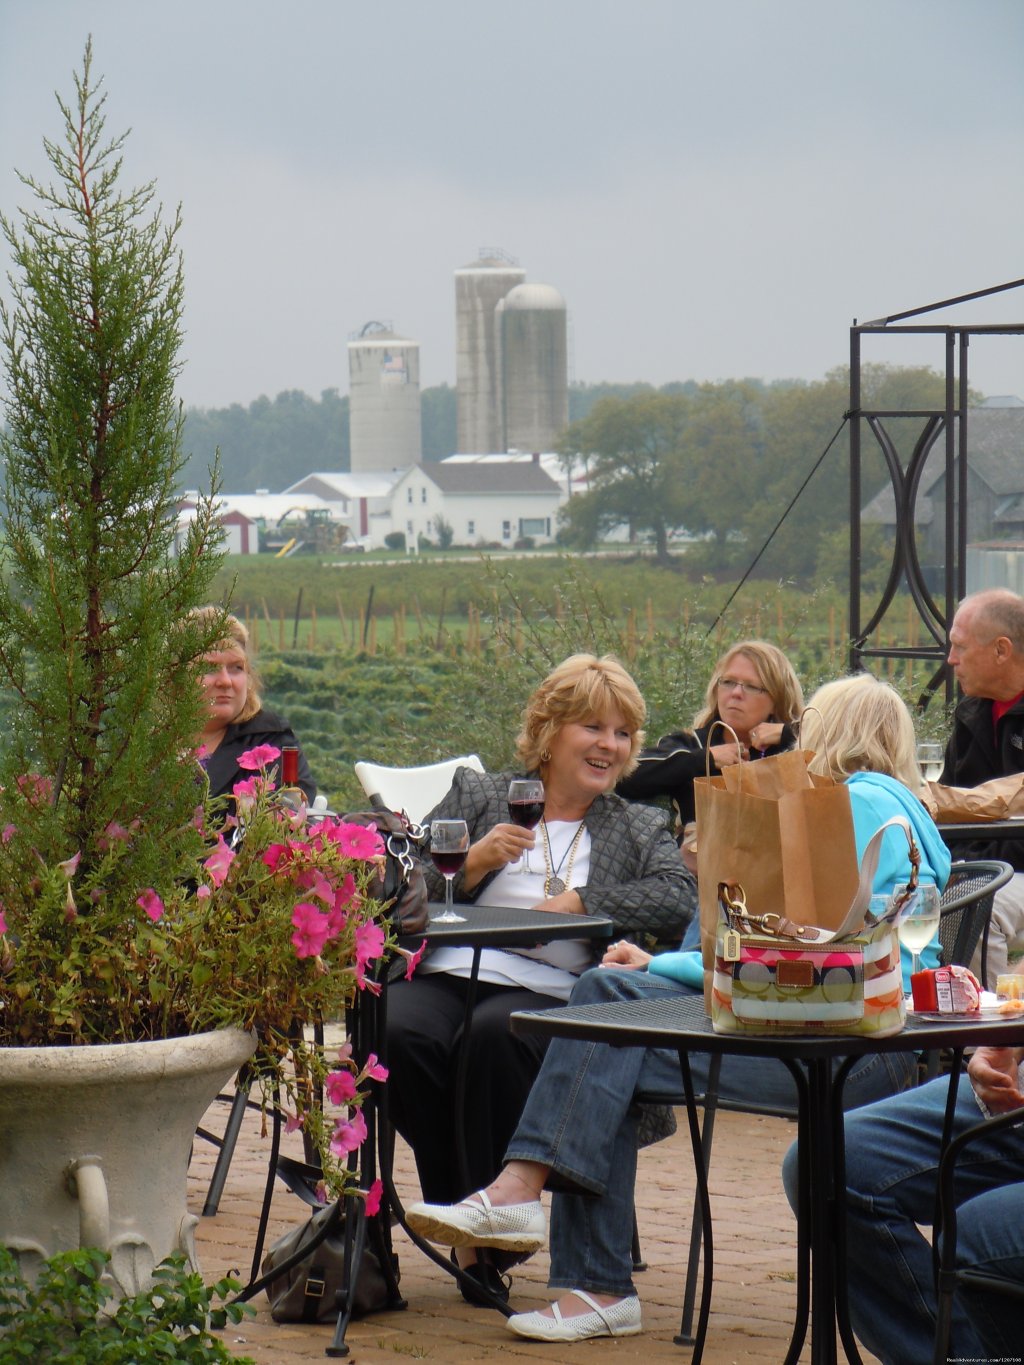 Summer Music Night on the Patio | Parallel 44 Vineyard & Winery | Image #5/14 | 